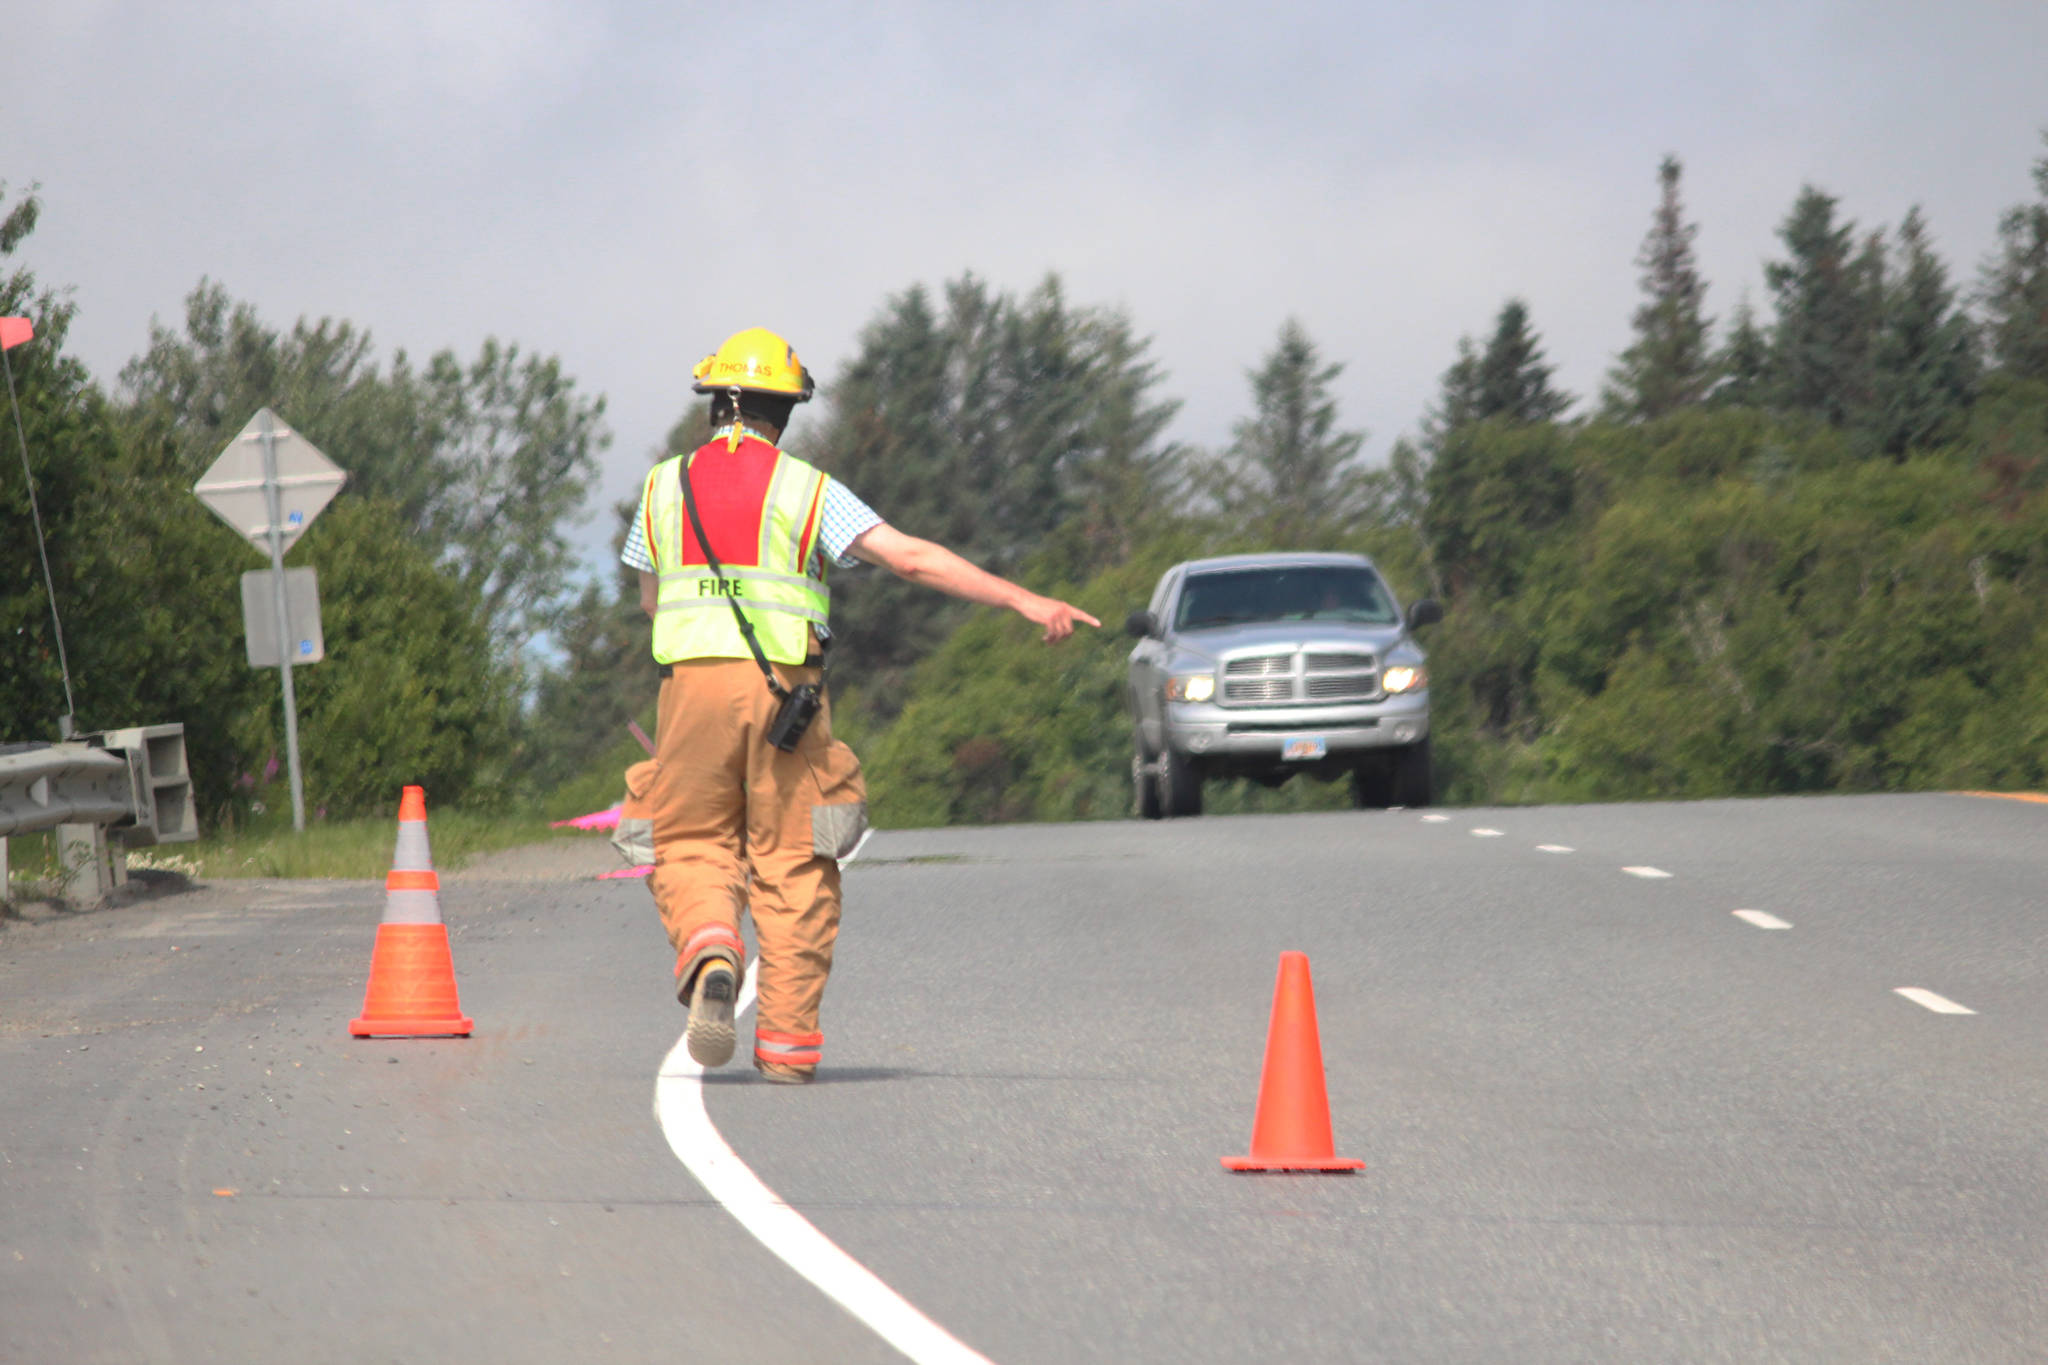 A first responder directs an oncoming truck around the cones set out to give crews space while they responded to a report of a truck that had fallen over the edge near Baycrest Overlook on Monday, July 24, 2017 in Homer, Alaska. First responders found the pickup truck that had fallen over the edge after hitting a guardrail, and searched for a possible victim until getting a report that the driver had crashed several days earlier and had walked away uninjured. Photo by Megan Pacer/Homer News